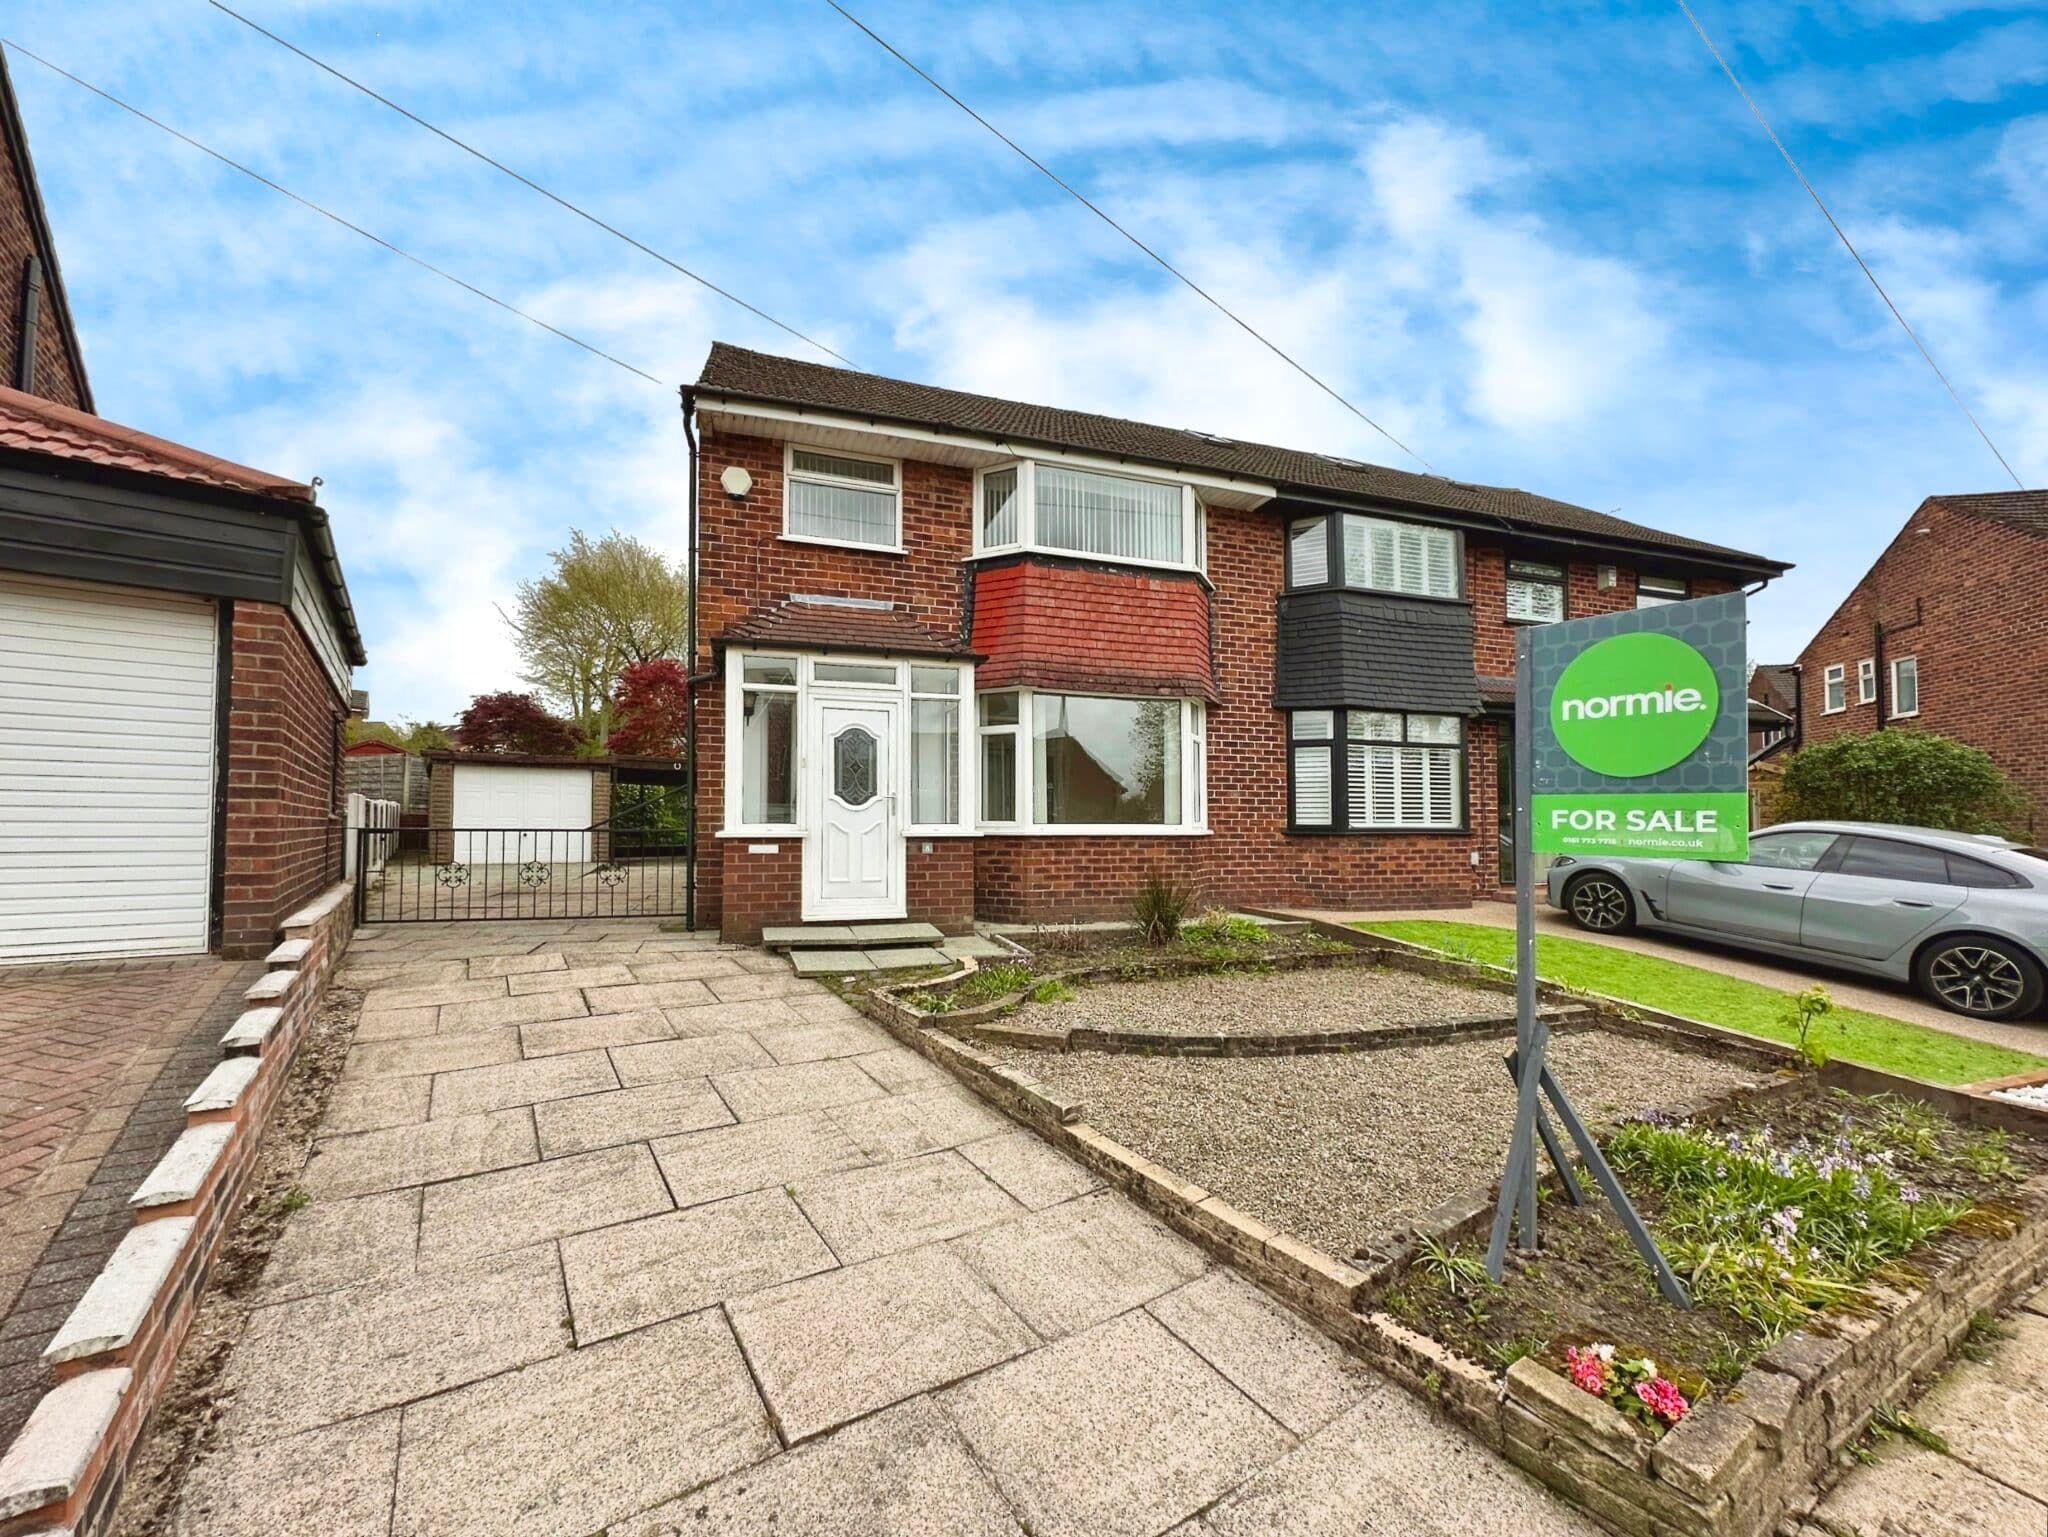 Hastings Avenue, Whitefield, Manchester, Manchester, M45 6UR